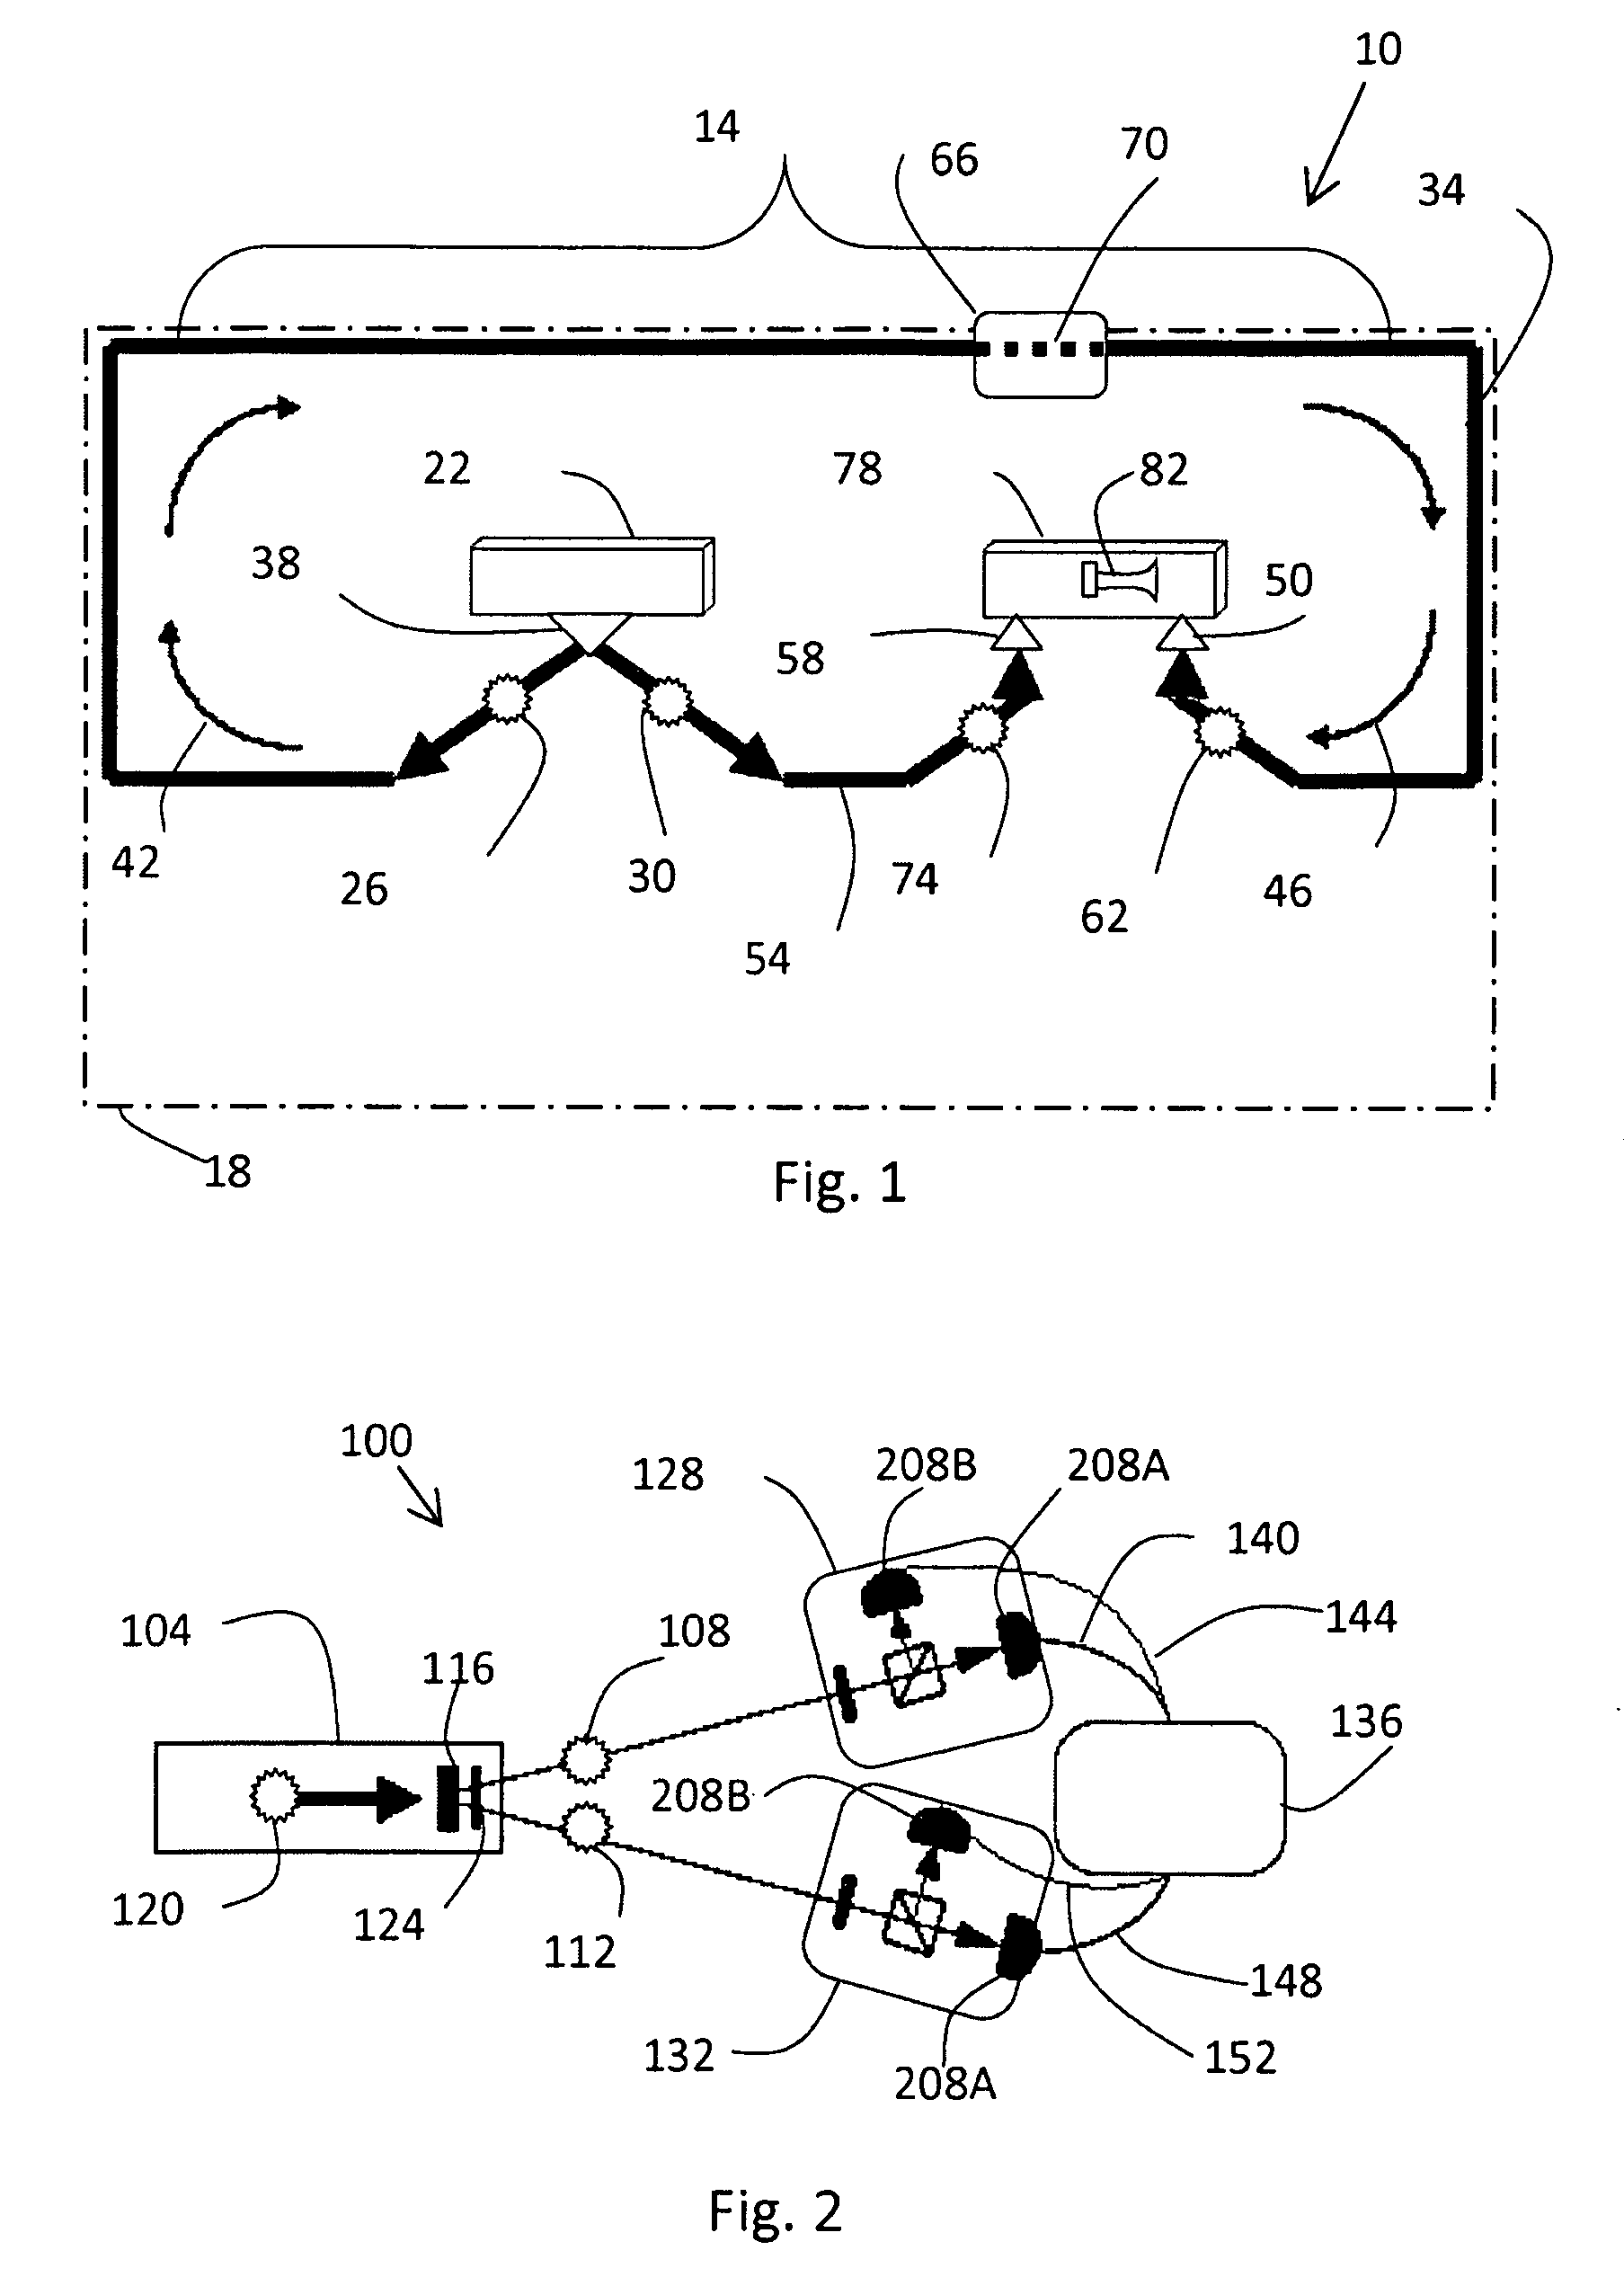 Tampering detection system using quantum-mechanical systems